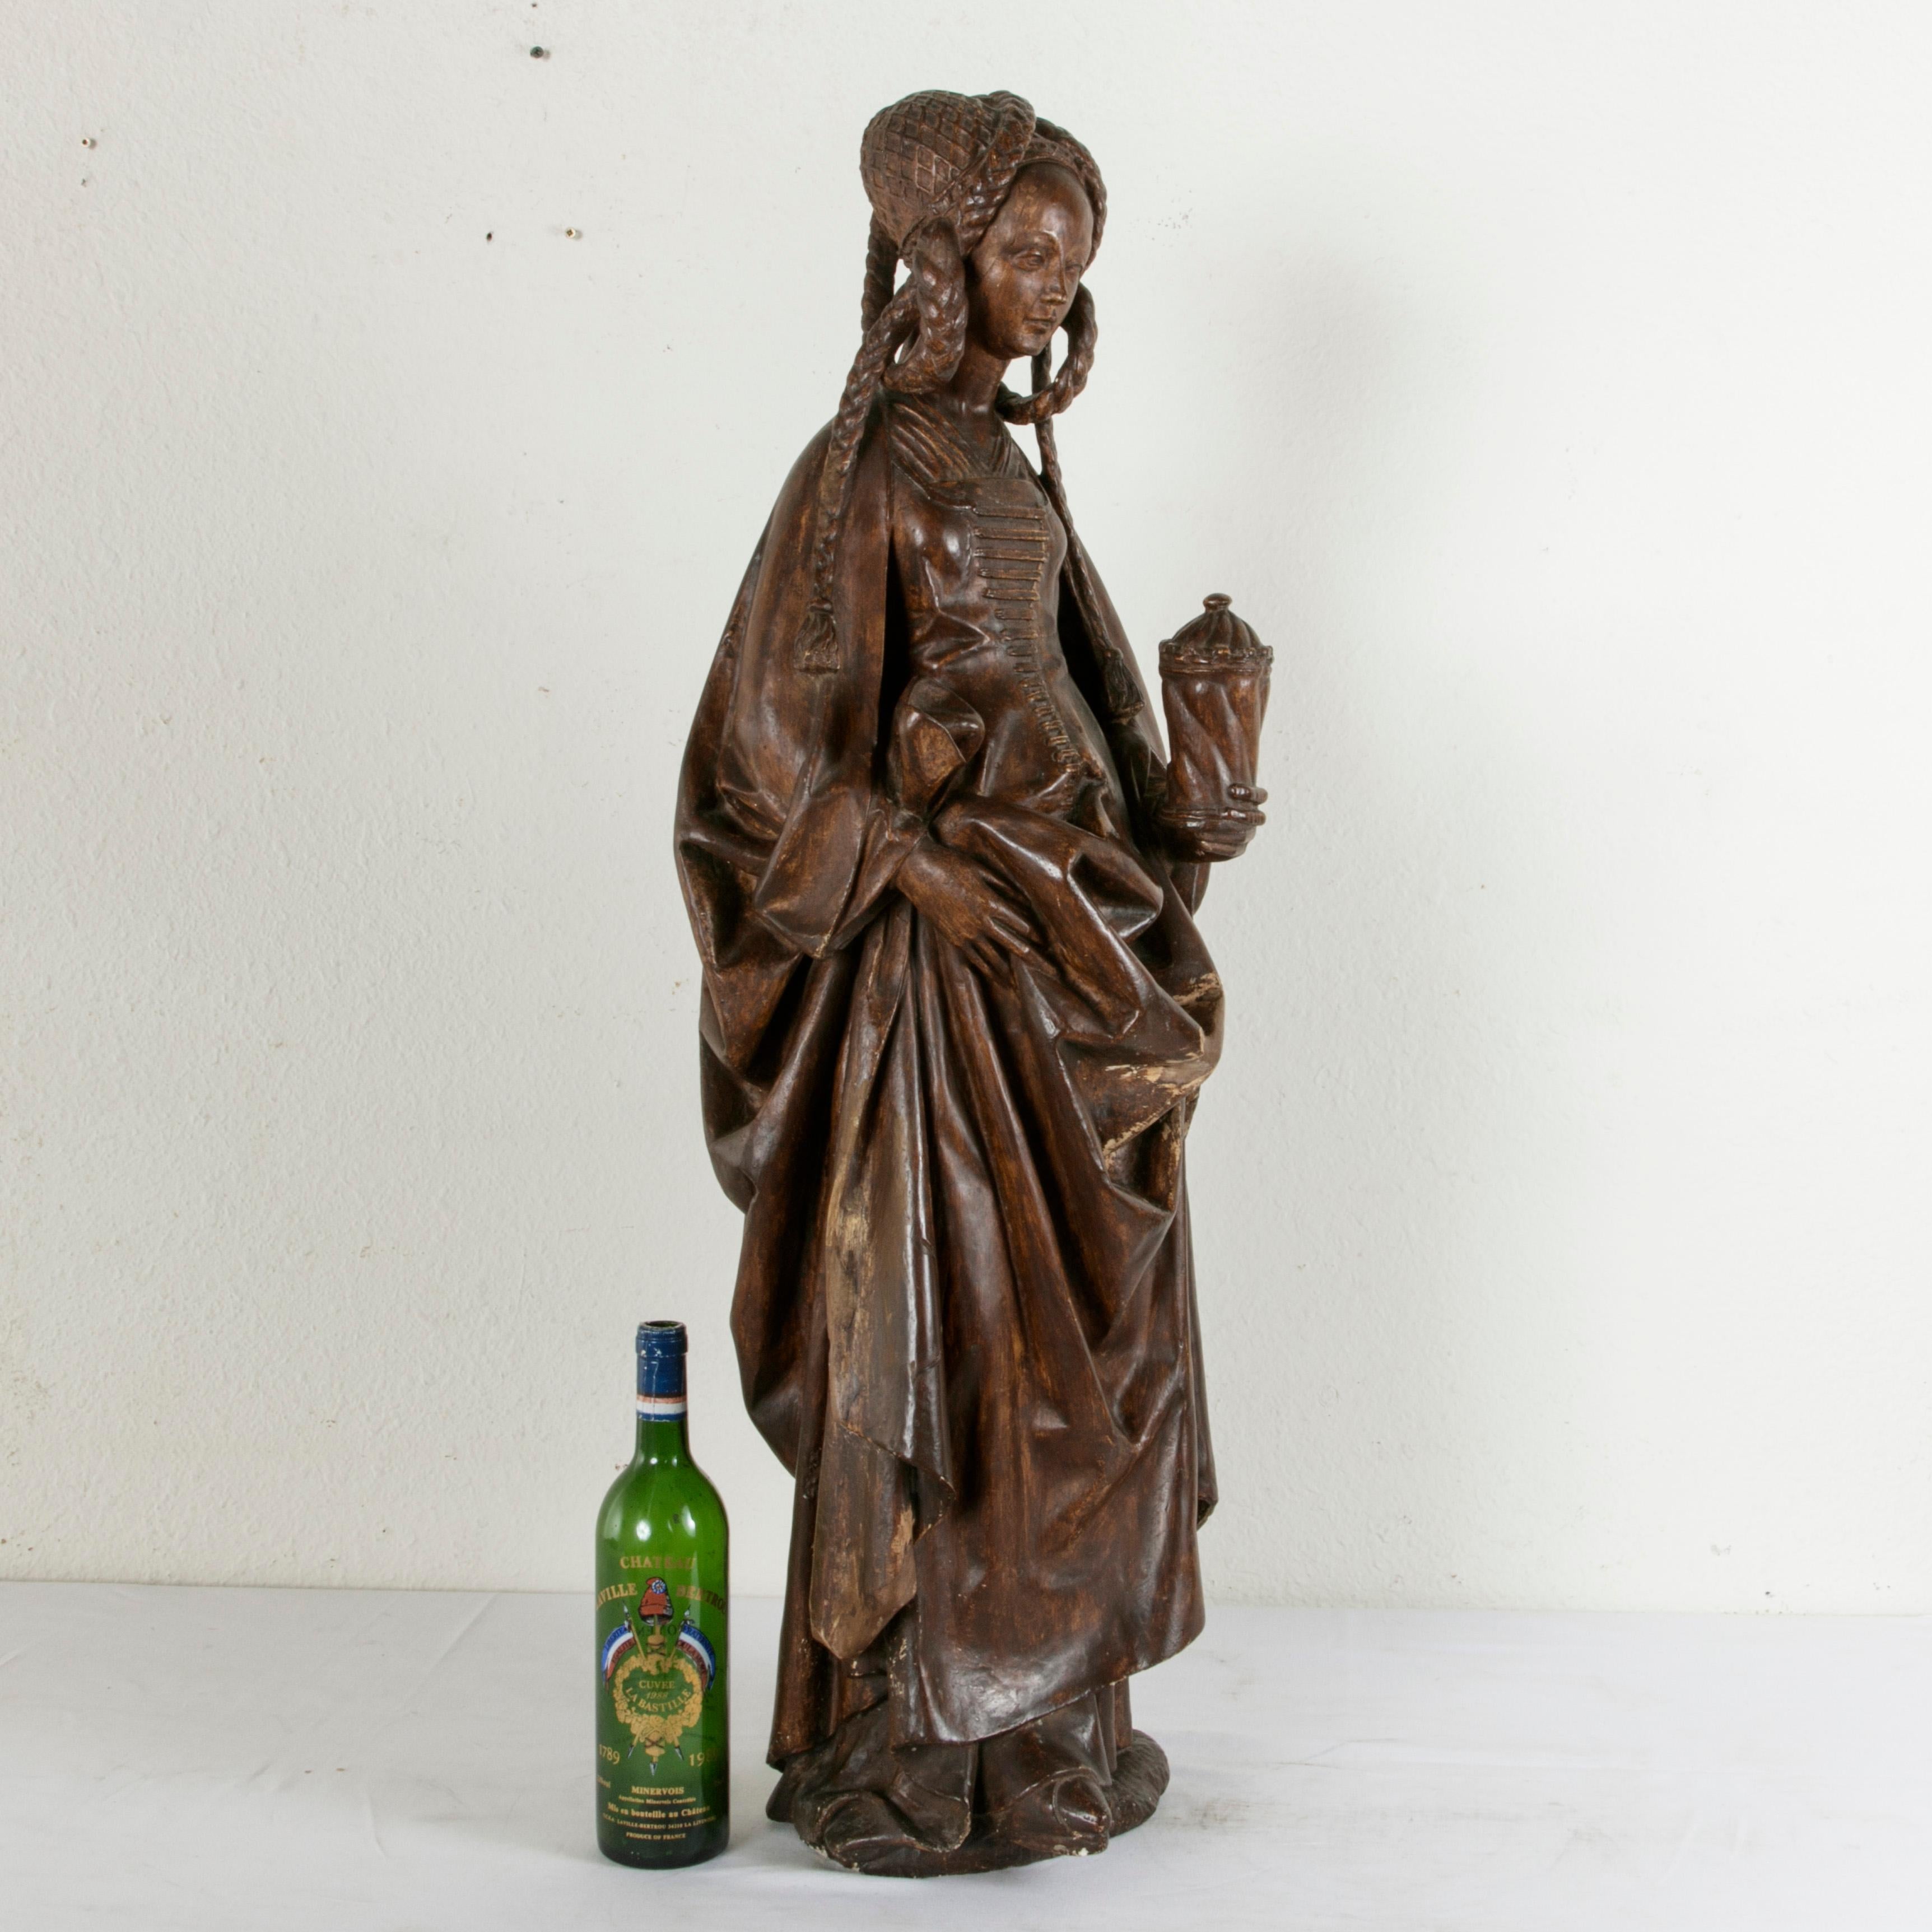 This large mid-19th century French patinated plaster over wood sculpture of Mary Magdalene features the saint clothed in fine Renaissance dress. She holds an apothecary jar of holy oil used for anointing in her left hand while her right hand gathers